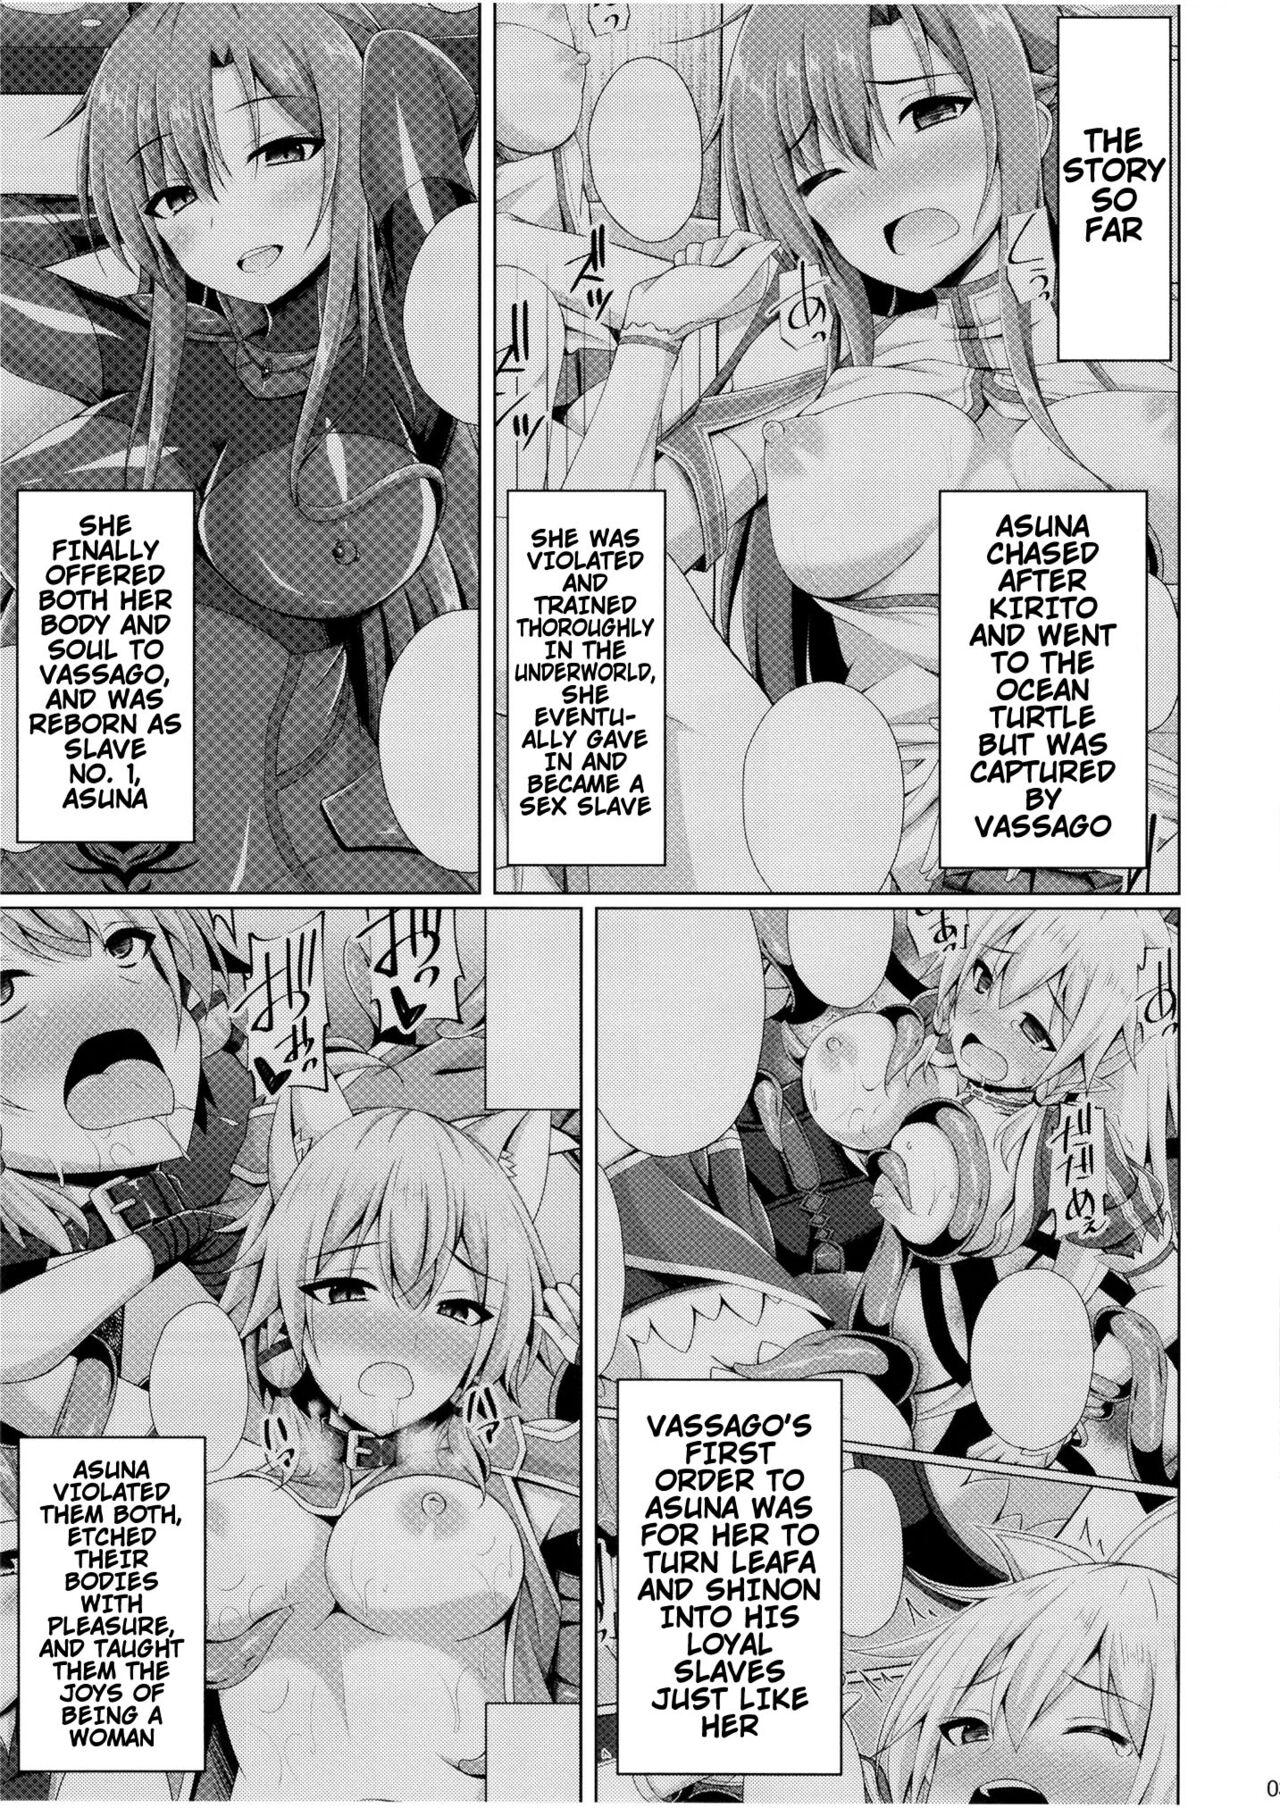 Small Boobs Kuro no Kenshito Yobareta Ore wa mou nai... | There's Nothing Left Of Me From When I Was The Black Knight - Sword art online Firsttime - Page 2